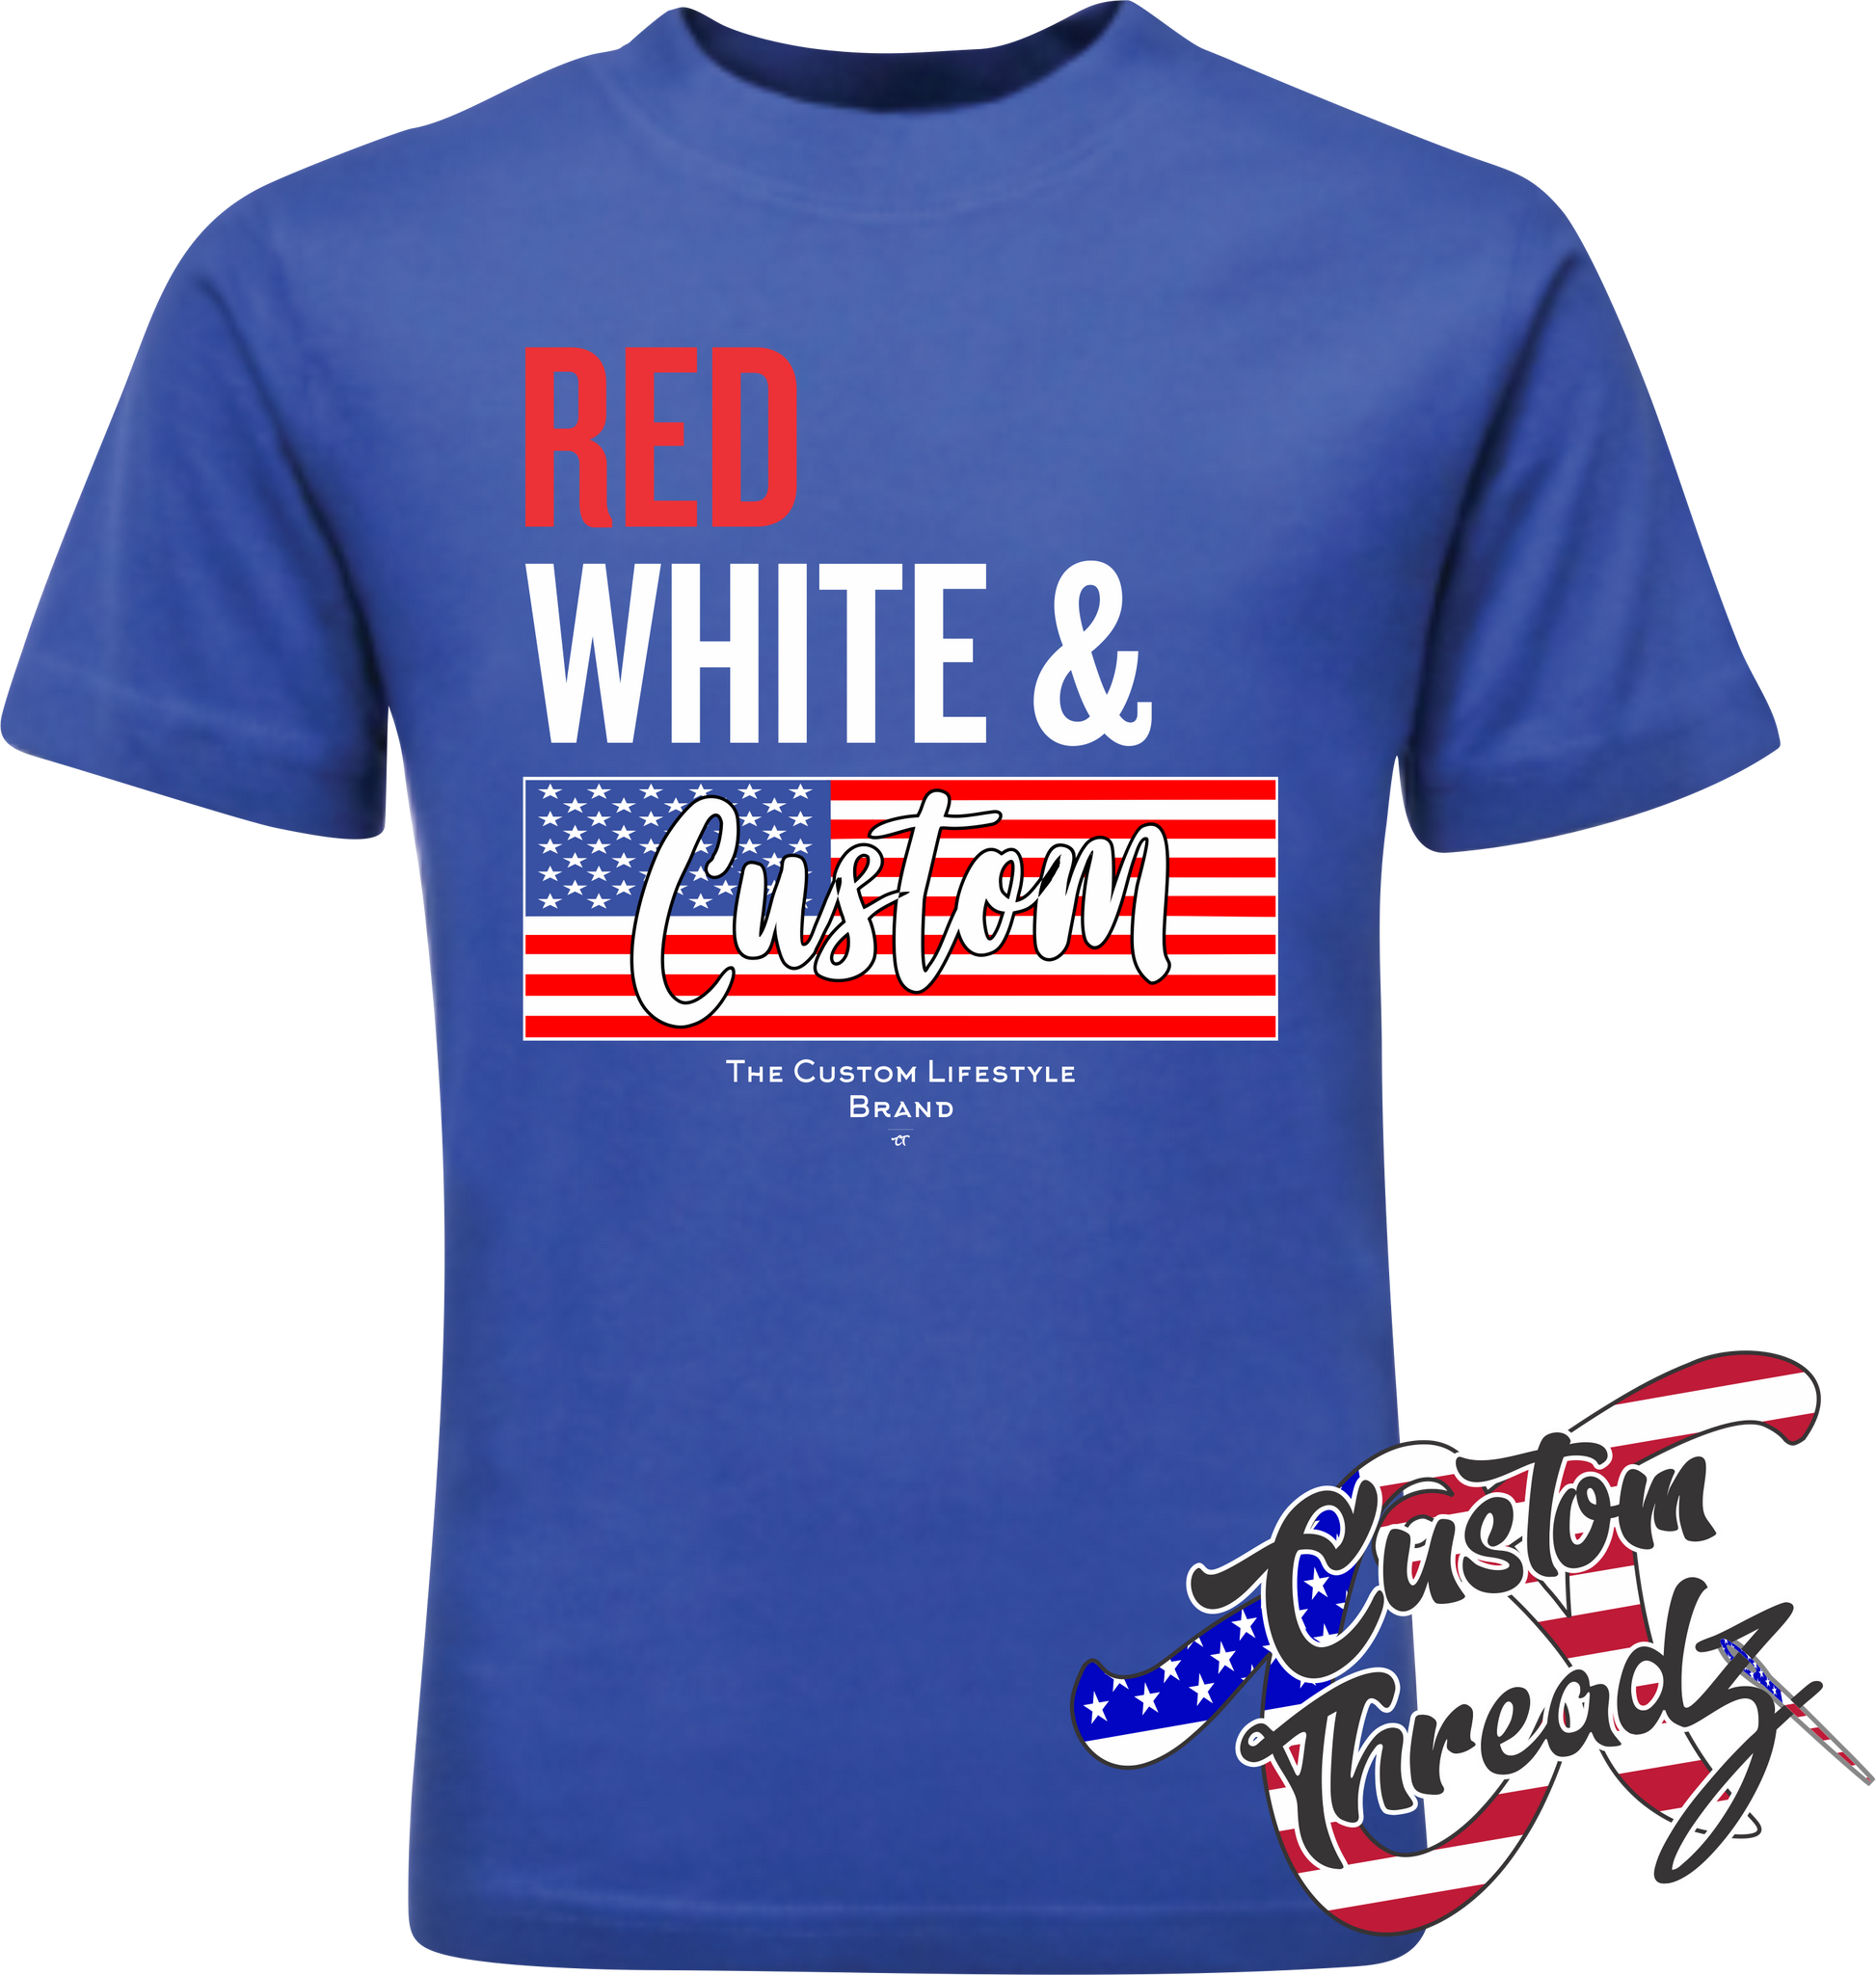 royal blue youth tee with red white and custom american flag DTG printed design